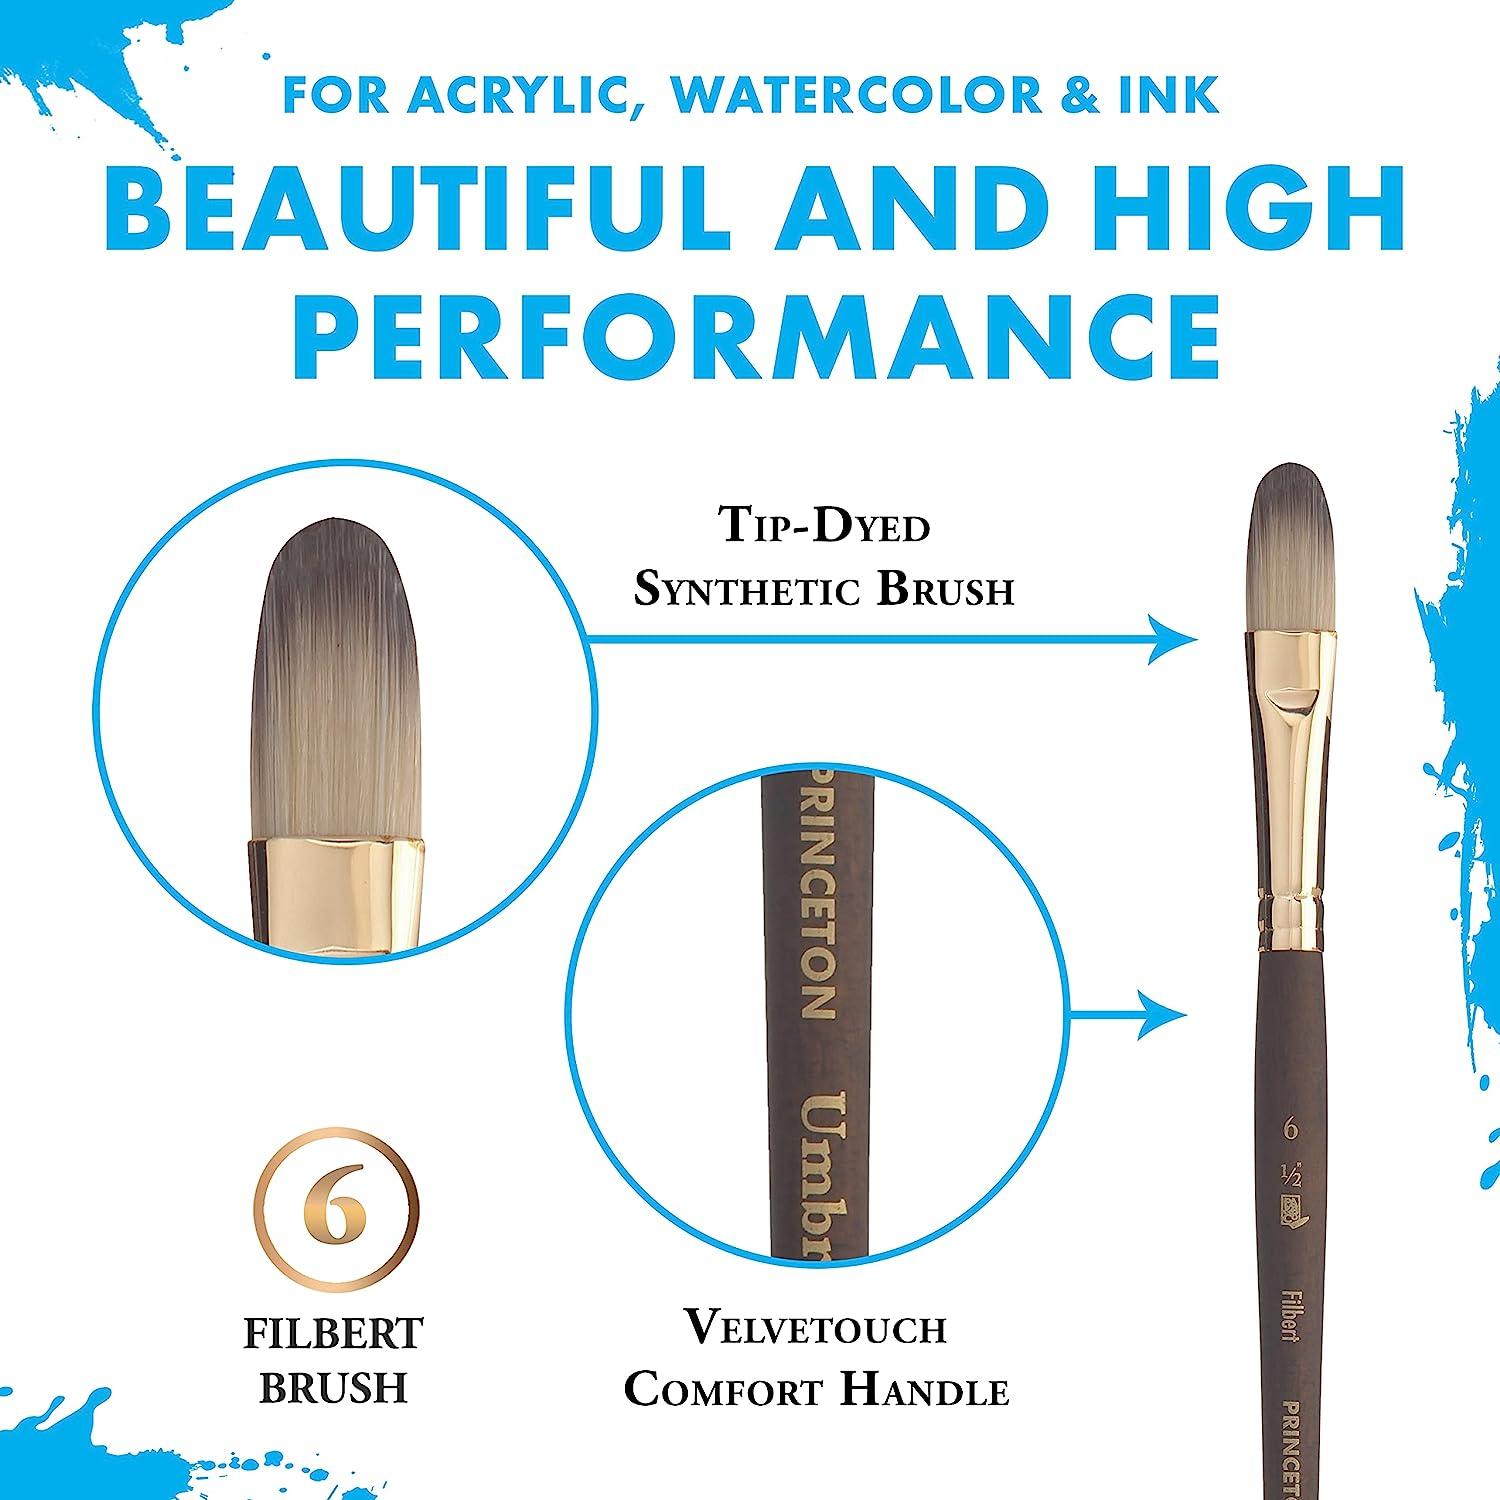 Gouache vs Watercolor: What's the Difference? - Princeton Brush